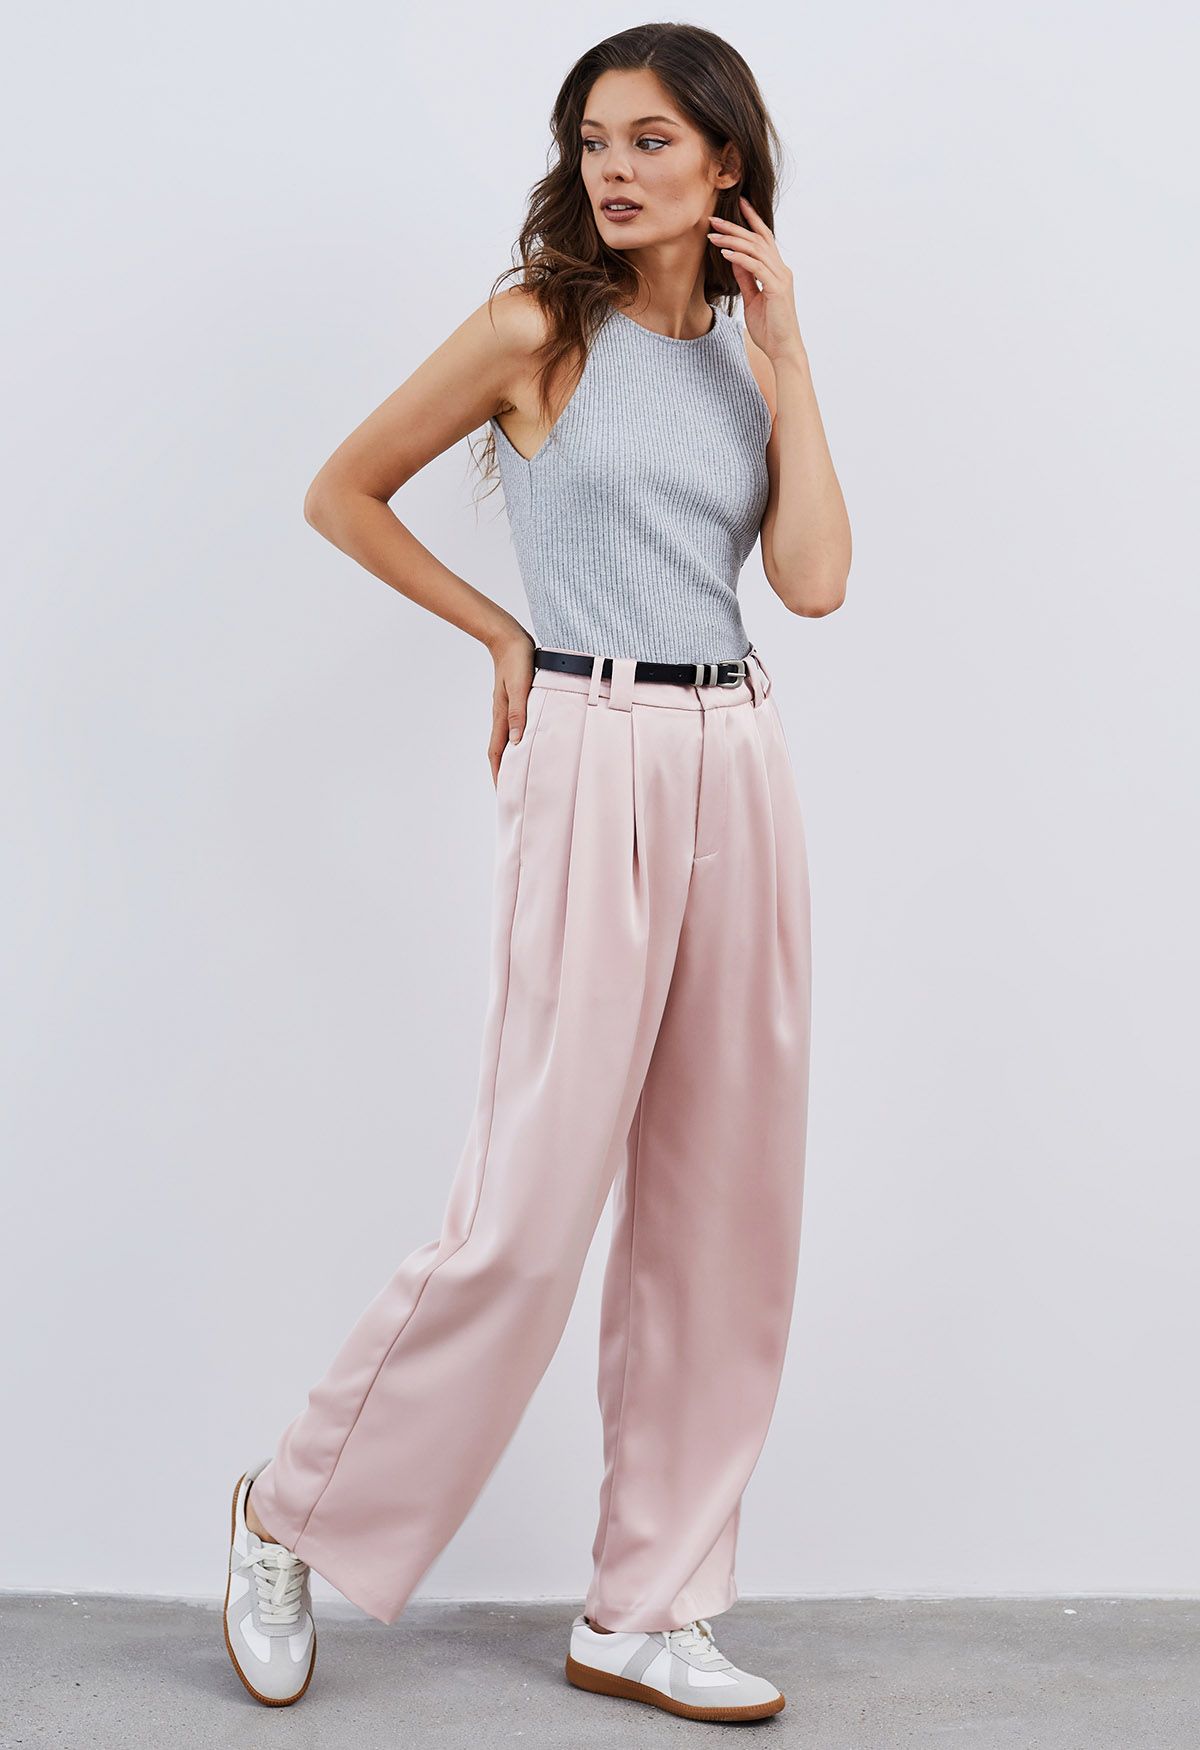 Satin Straight-Leg Pants with Faux Leather Belt in Pink - Retro, Indie and  Unique Fashion